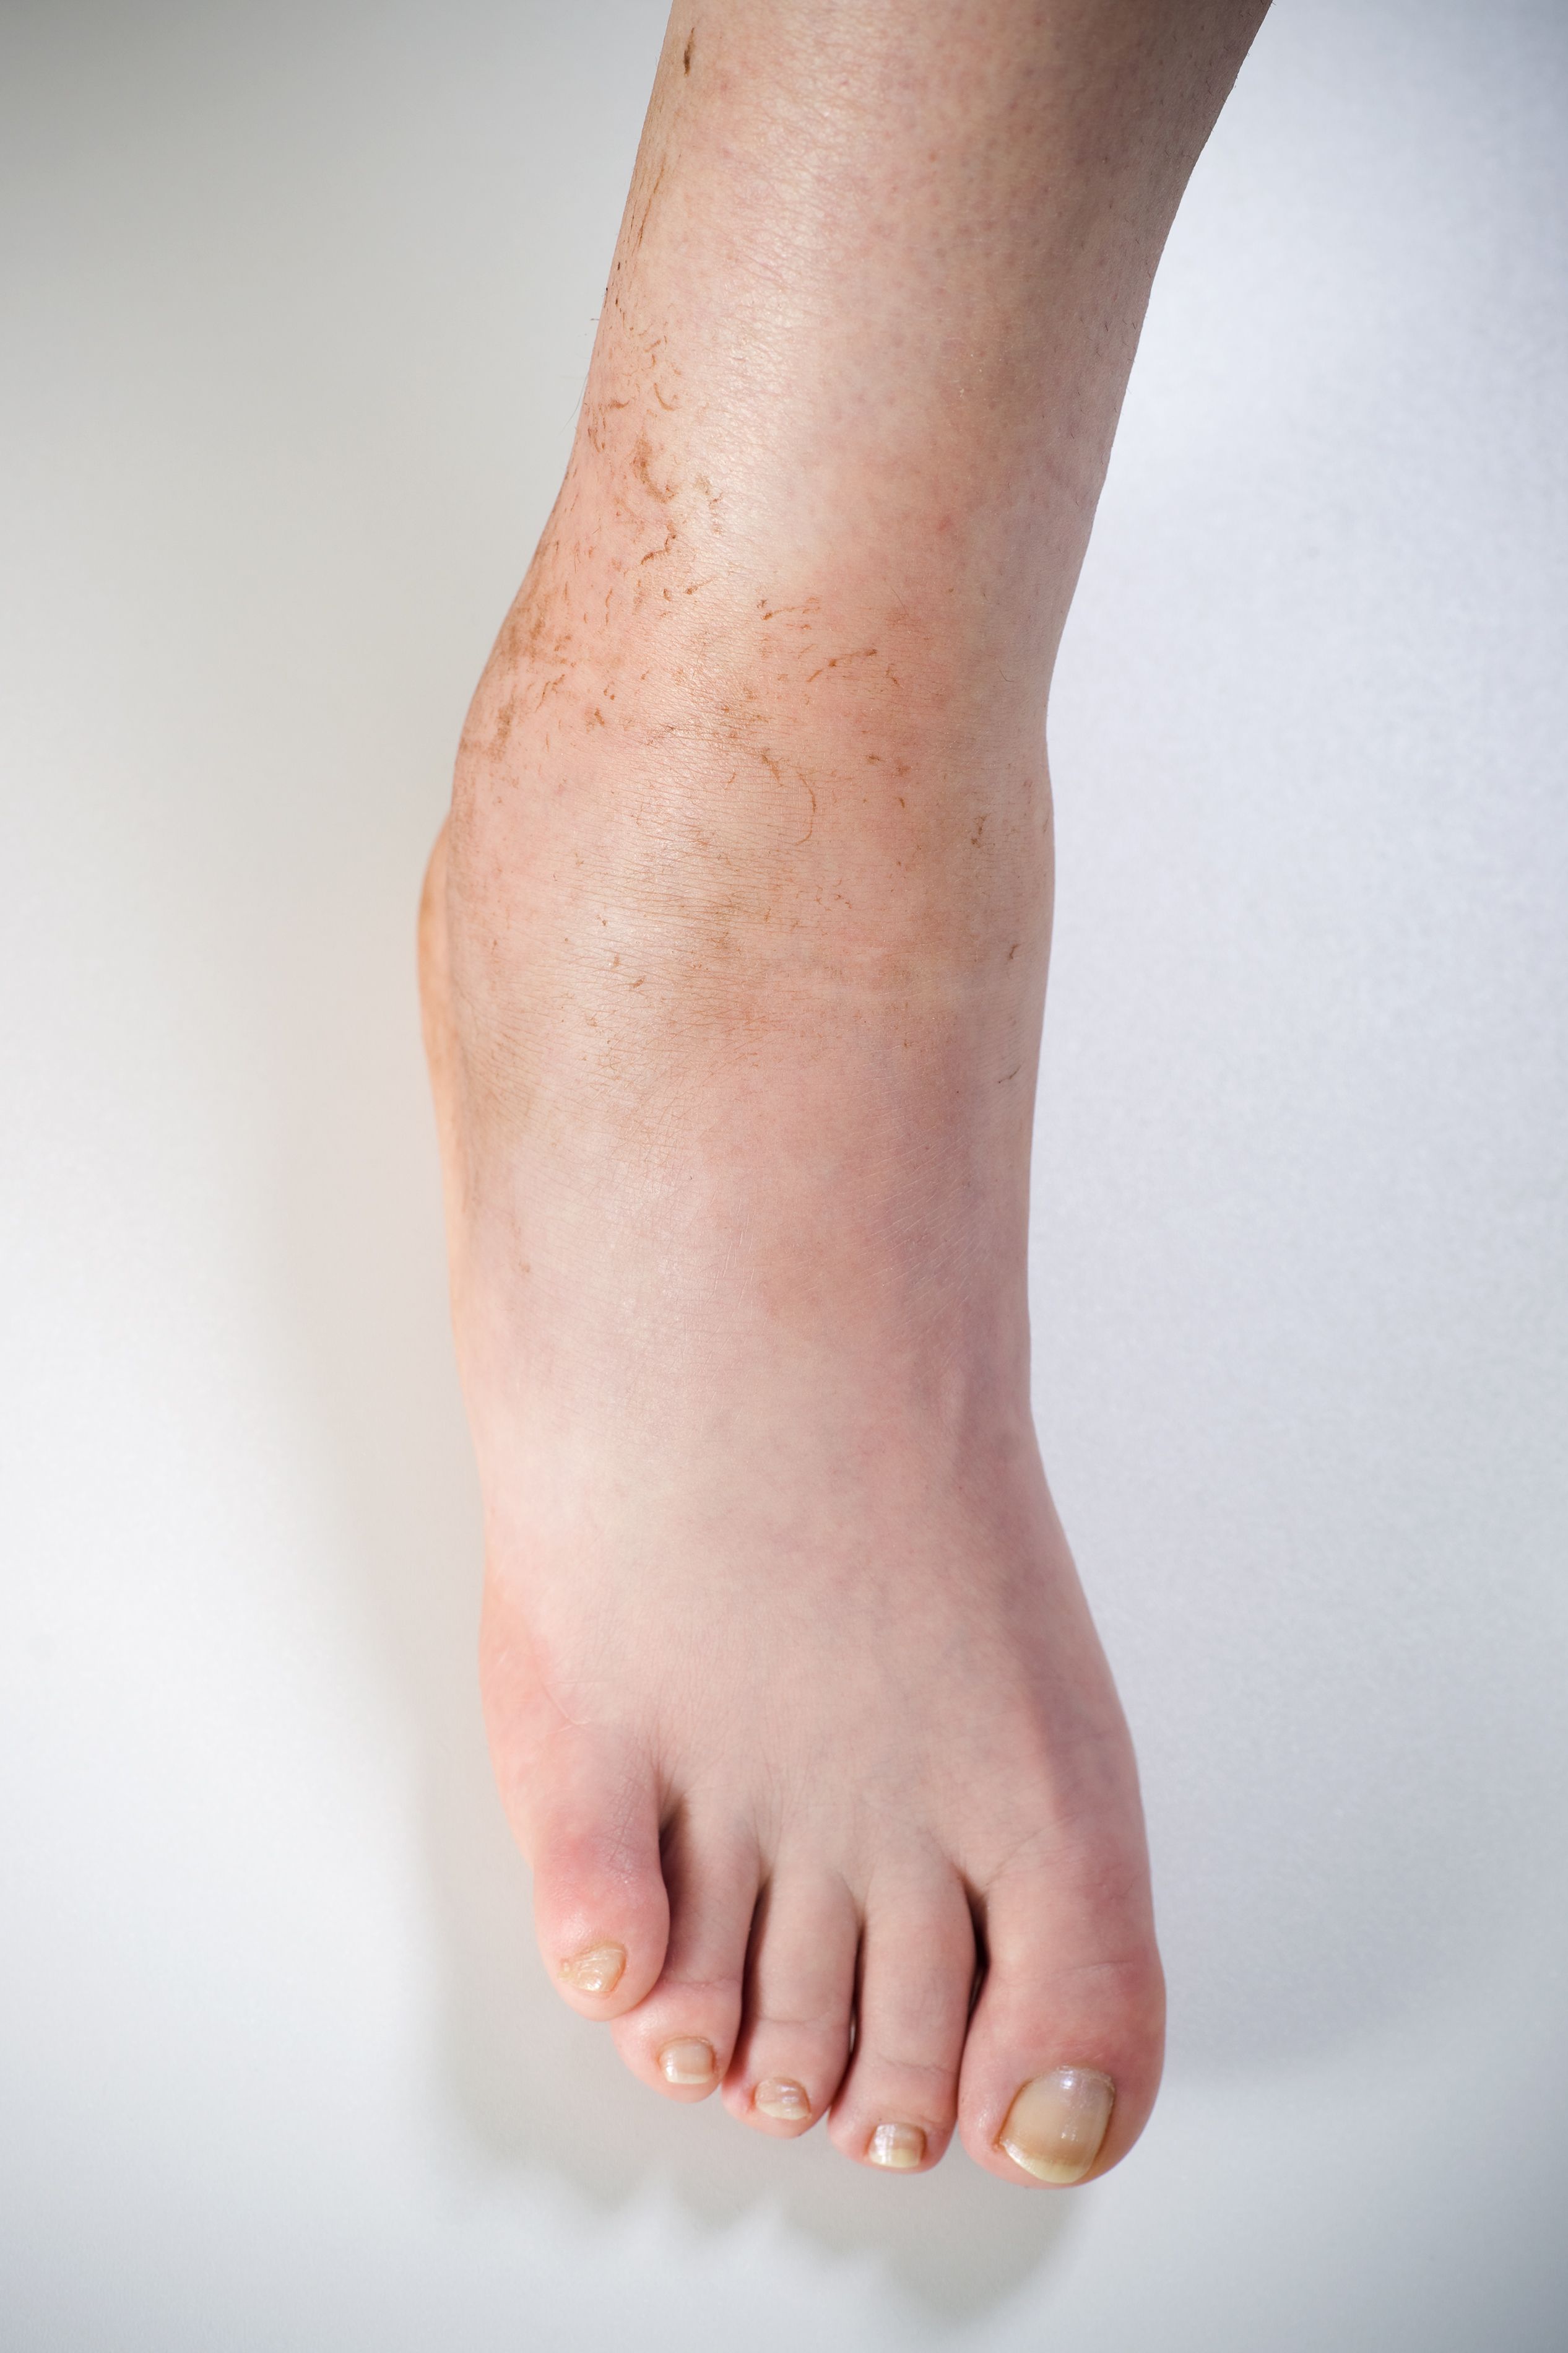 What Causes Swollen Feet and Ankles? – My FootDr